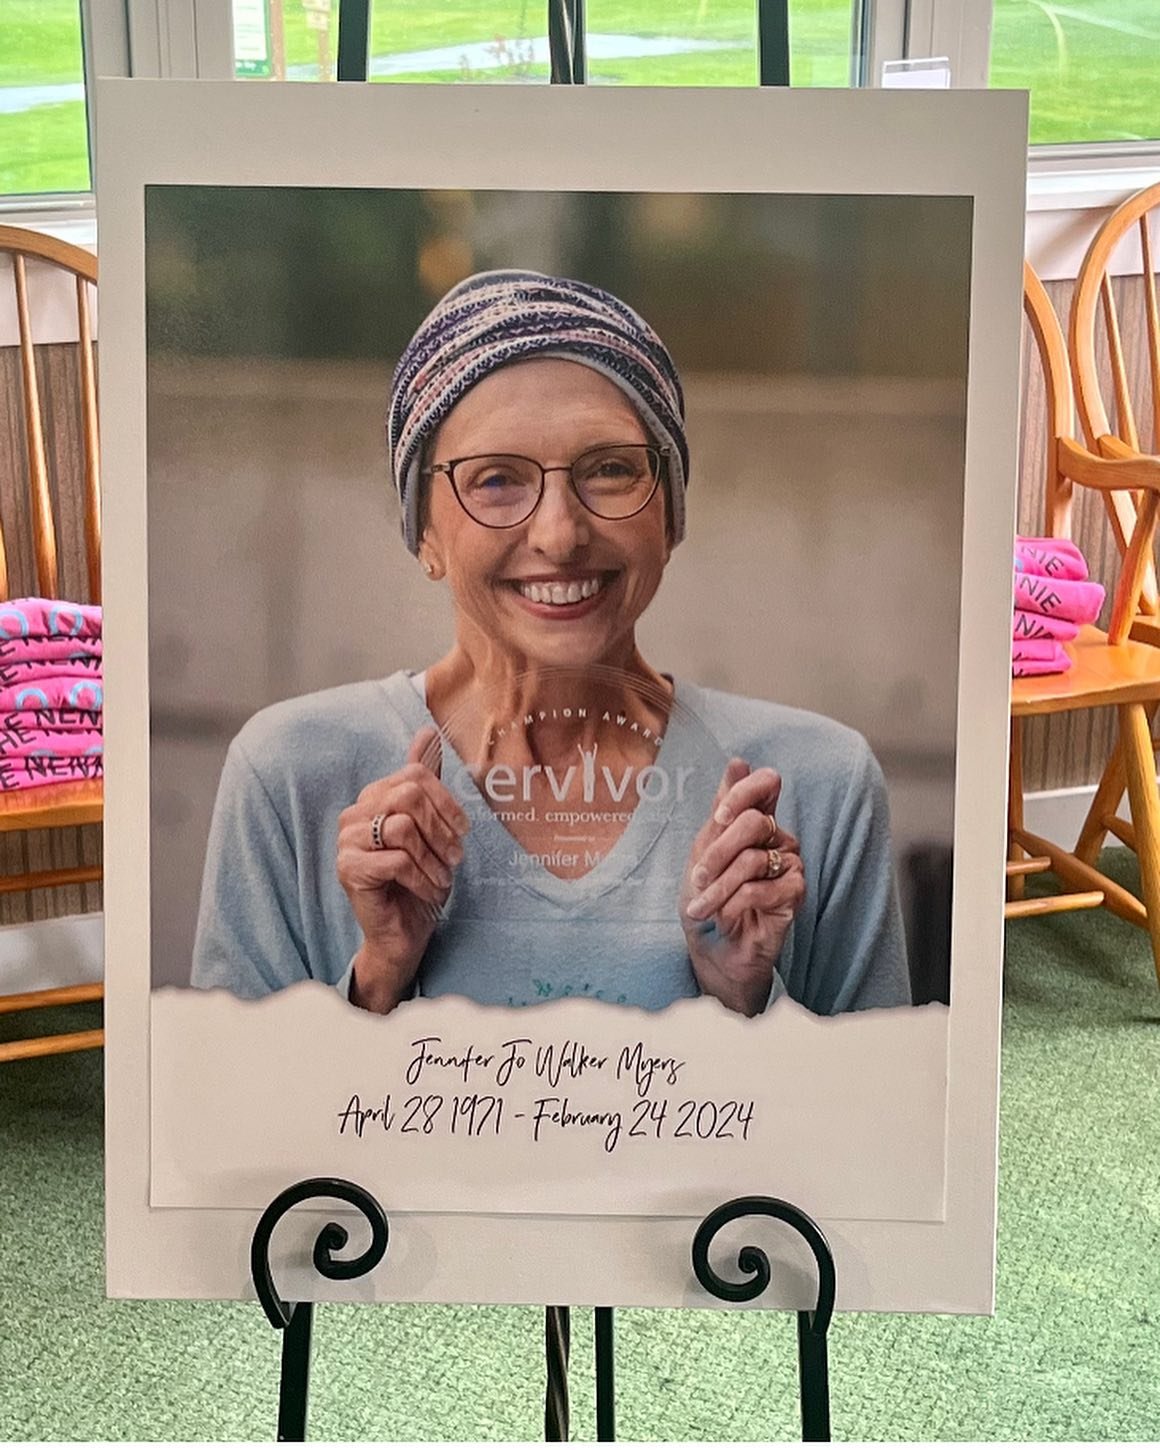 Saturday, April 27th, The Nennie Foundation held the 1st Annual Nennie Scramble golf tournament at Nittany Country Club.  Friends, family and members of Cervivor gathered to raise funds and celebrate the life of Jennifer ￼Walker Myers.  The event was